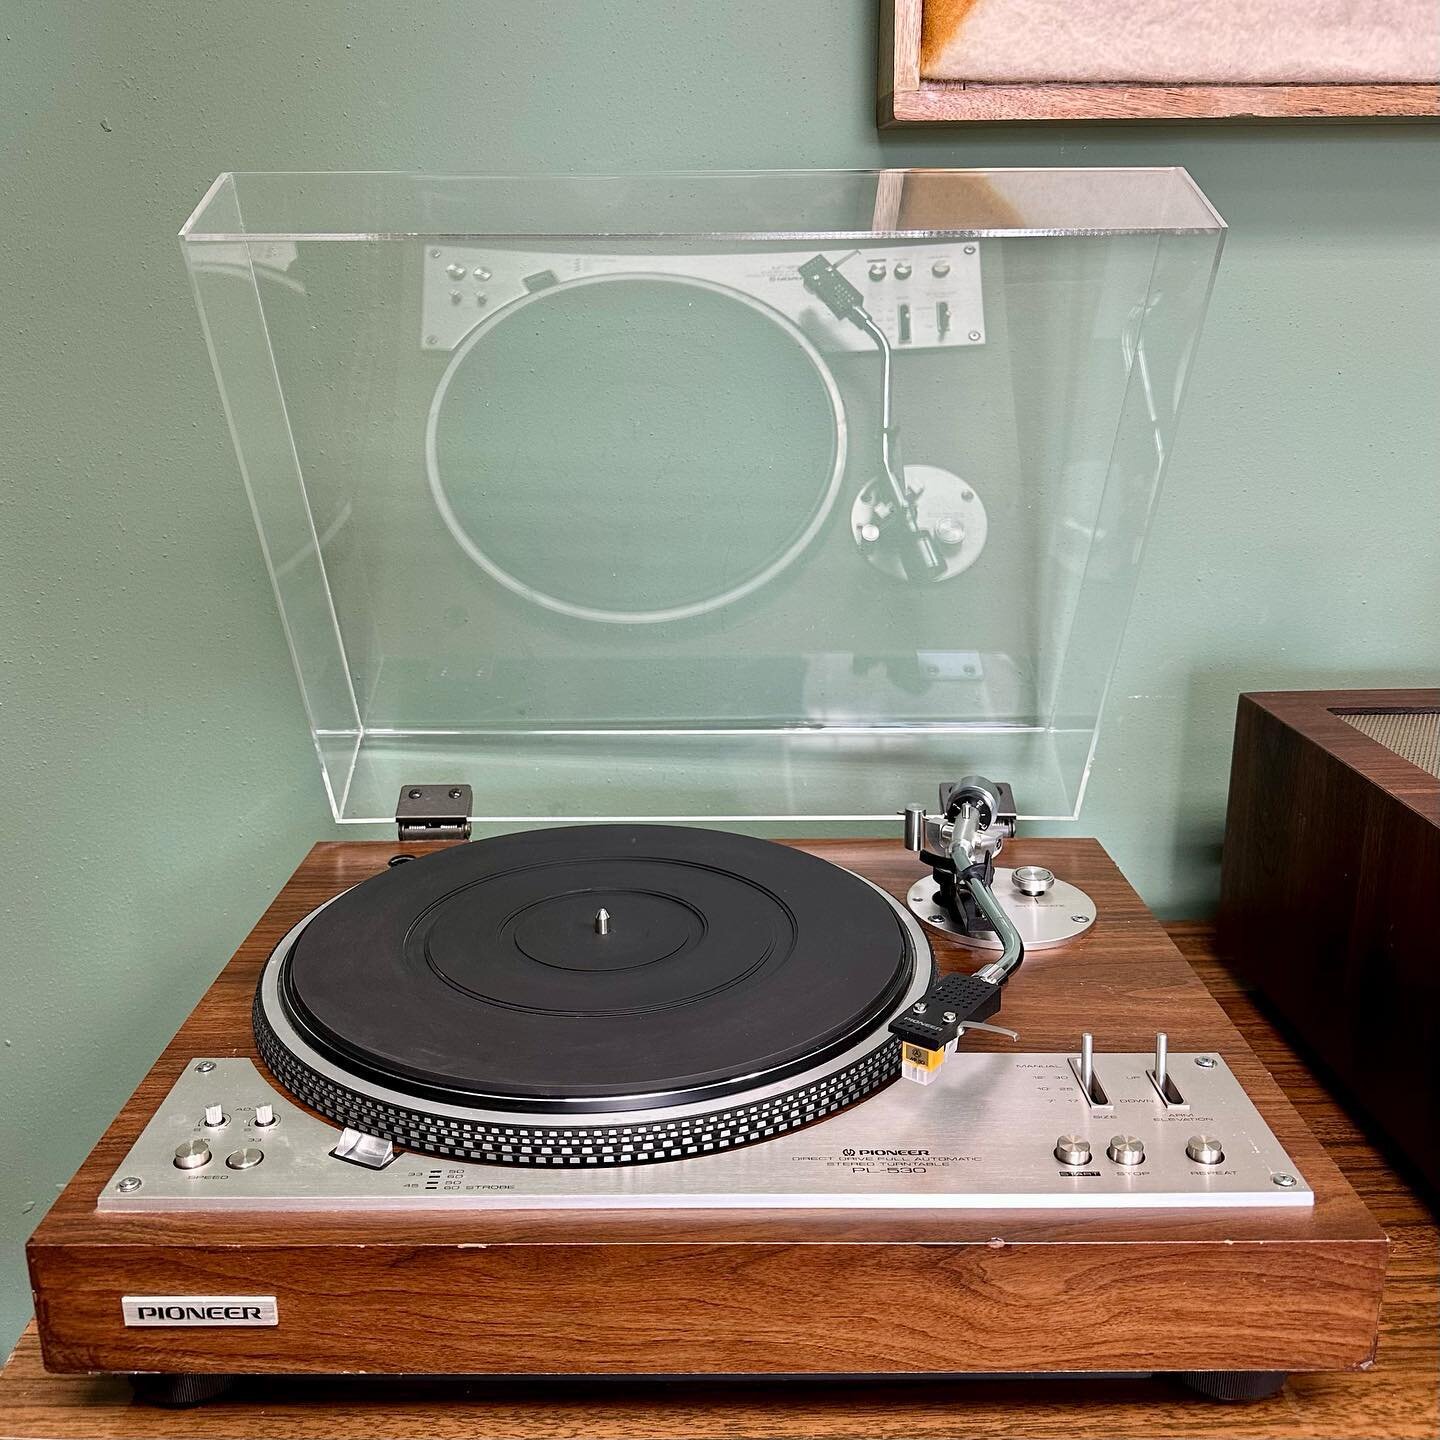 [AVAILABLE] When it comes to iconic turntables from the 1970s, the Pioneer PL-530 is at or near the top of the list. This ultra quiet direct drive table features fully automatic operation and a brand new Nagaoka MP110 cartridge (a $190 value.) We hav